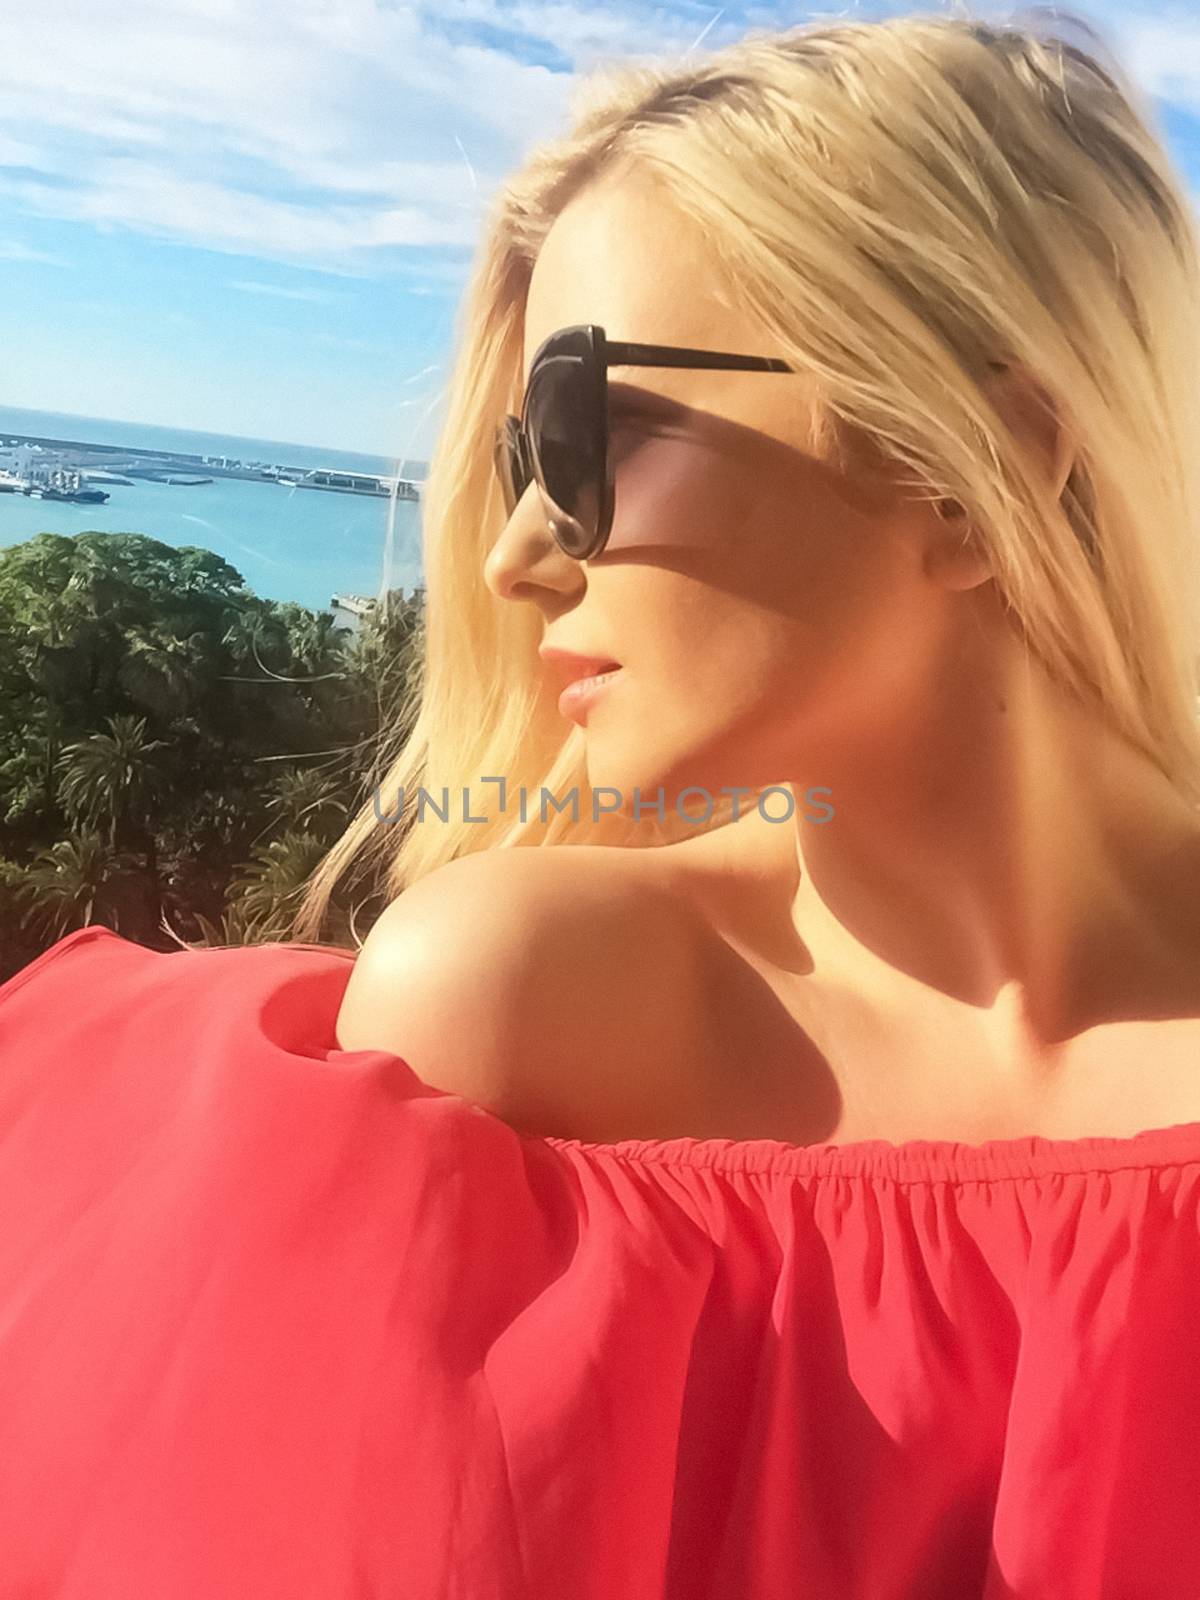 Red summer dress and chic sunglasses, beautiful model woman on vacation and travel at the seaside, luxury fashion and beauty brands